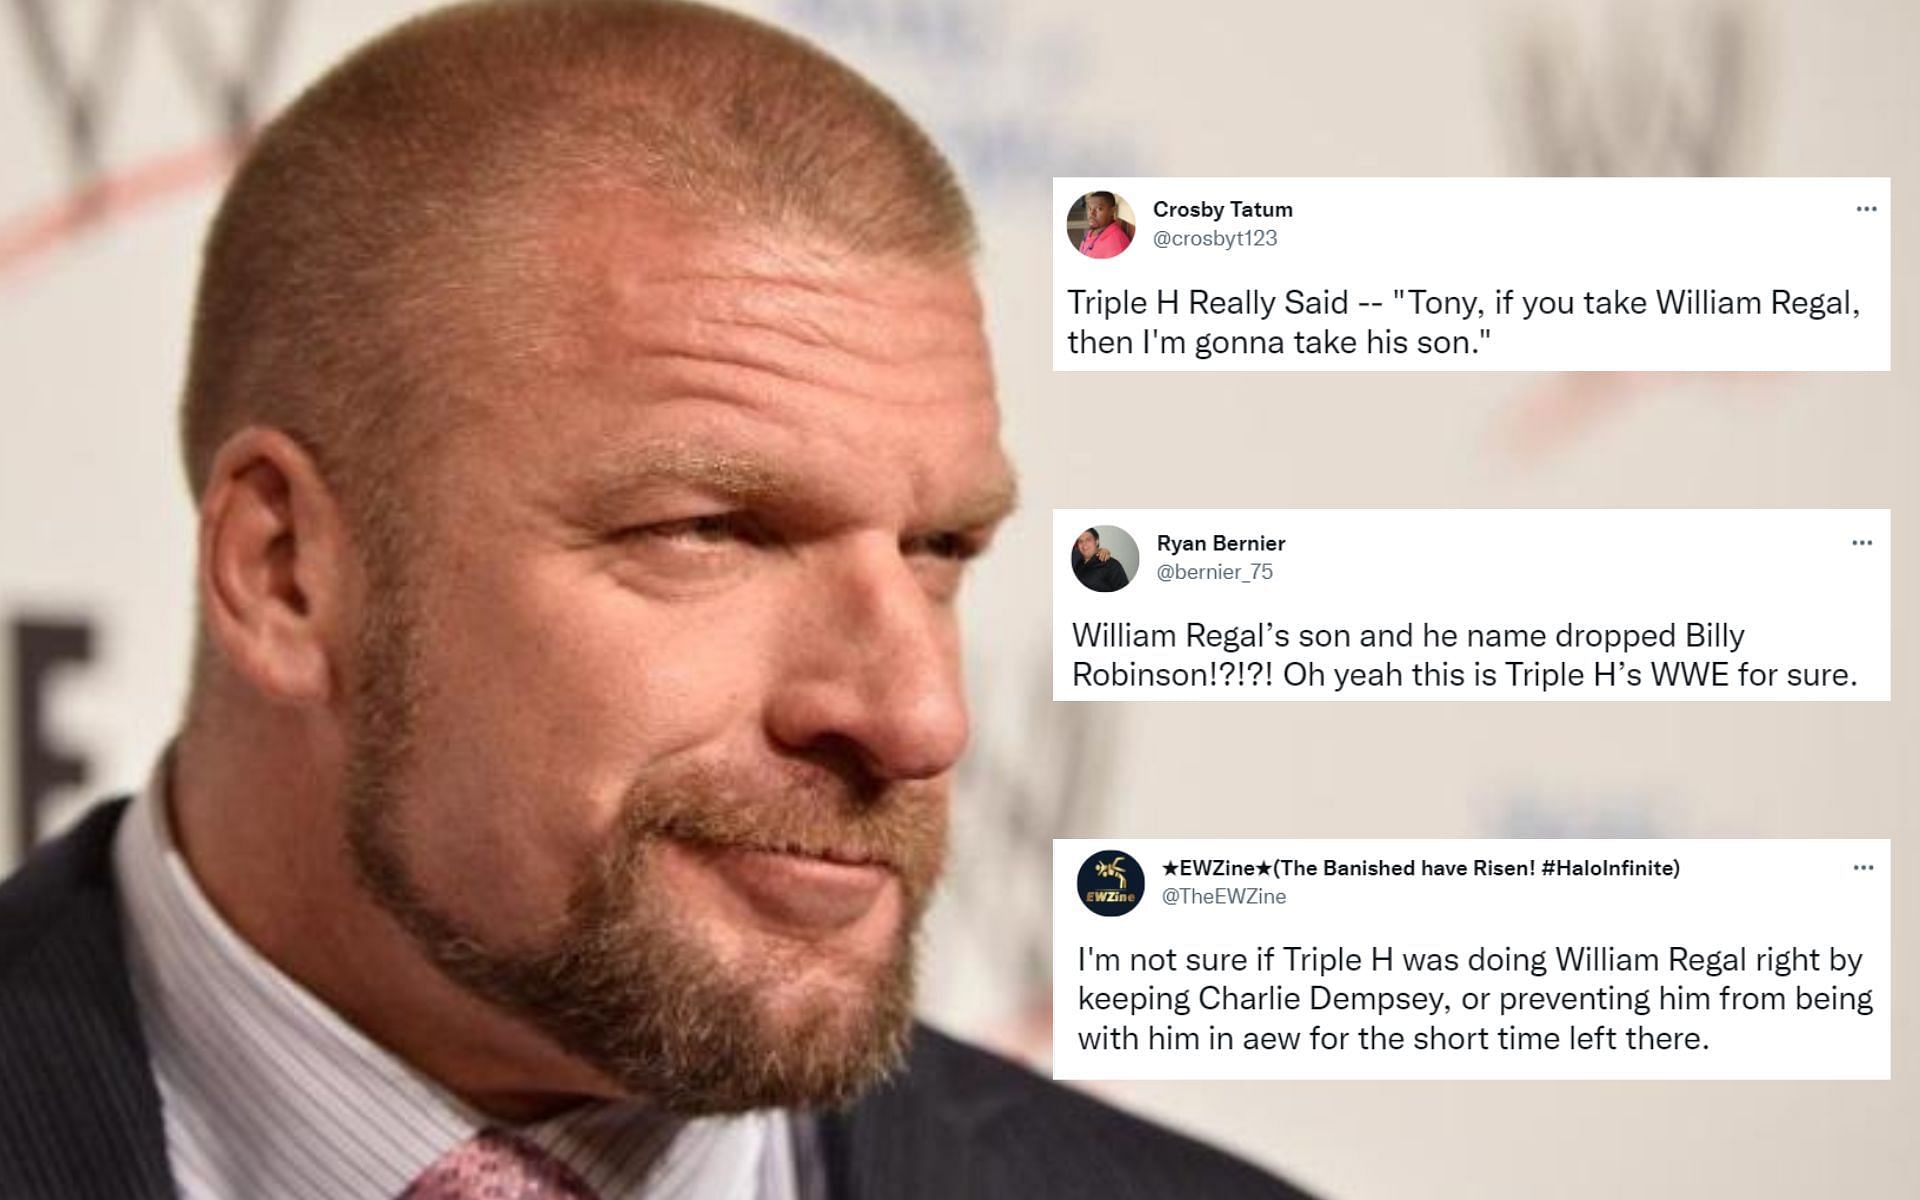 Triple H resumed his role as Executive Vice President of Talent Relations in WWE last month